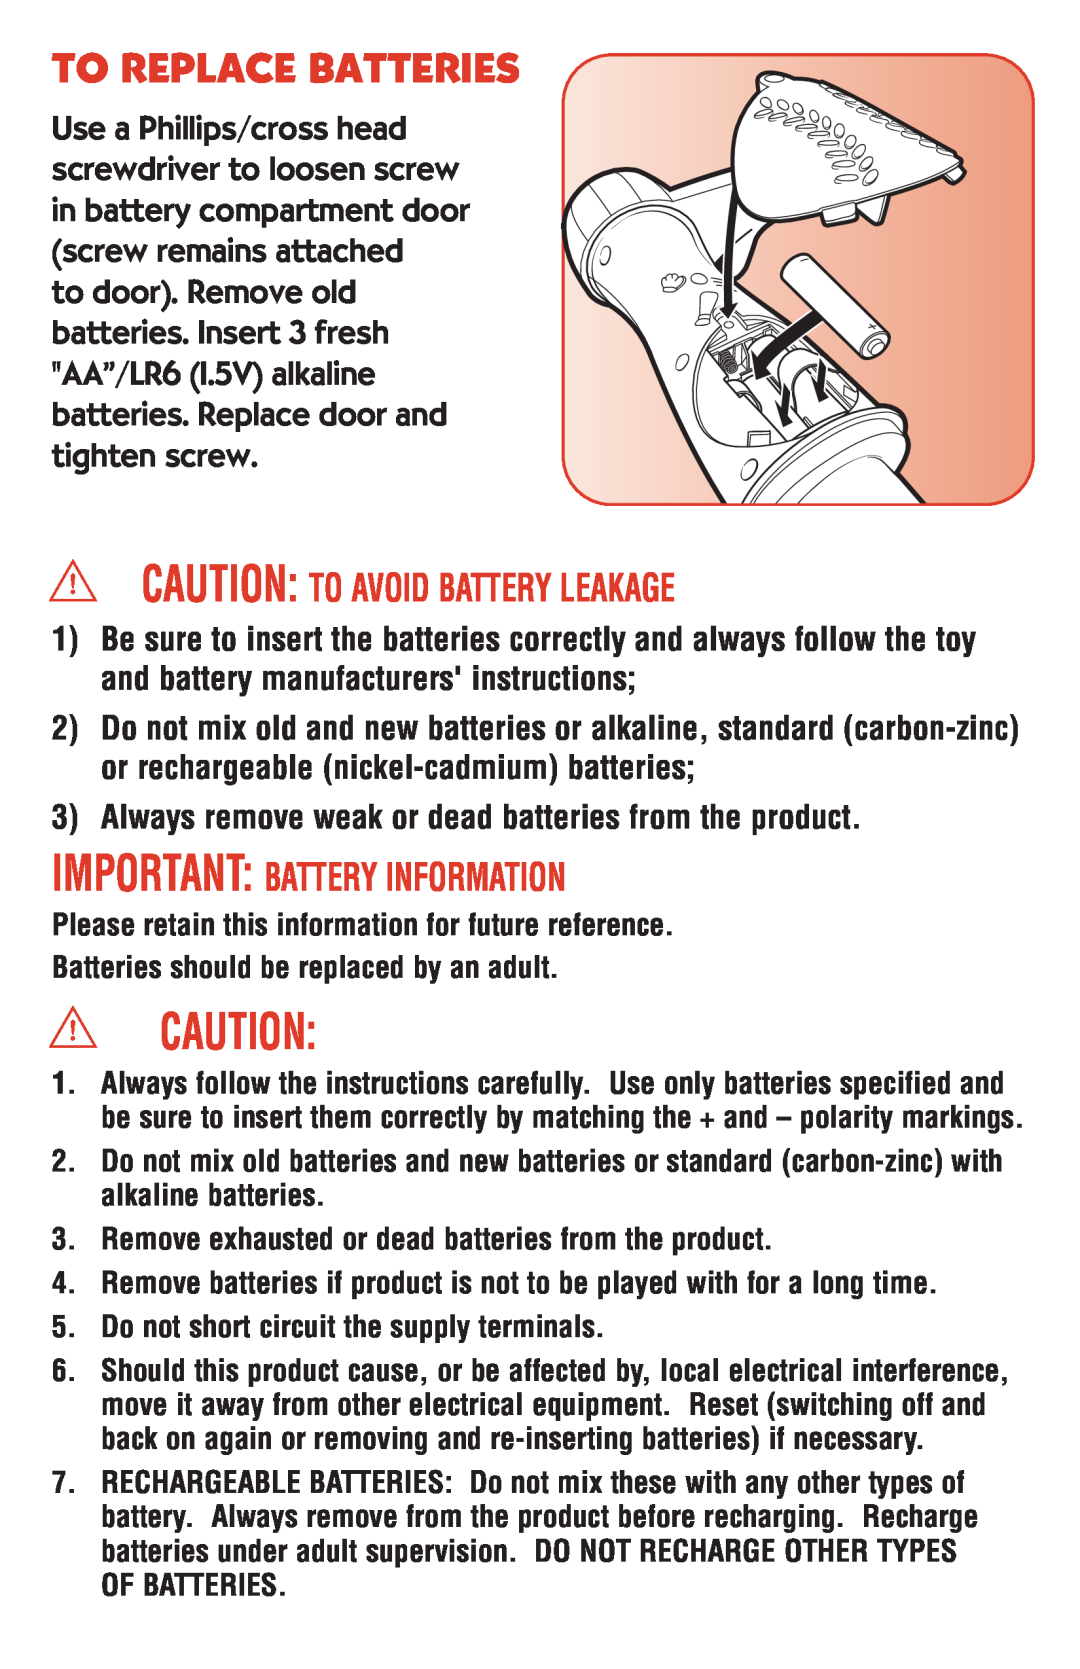 Hasbro 06195 manual To Replace Batteries, Caution To Avoid Battery Leakage, Important Battery Information 